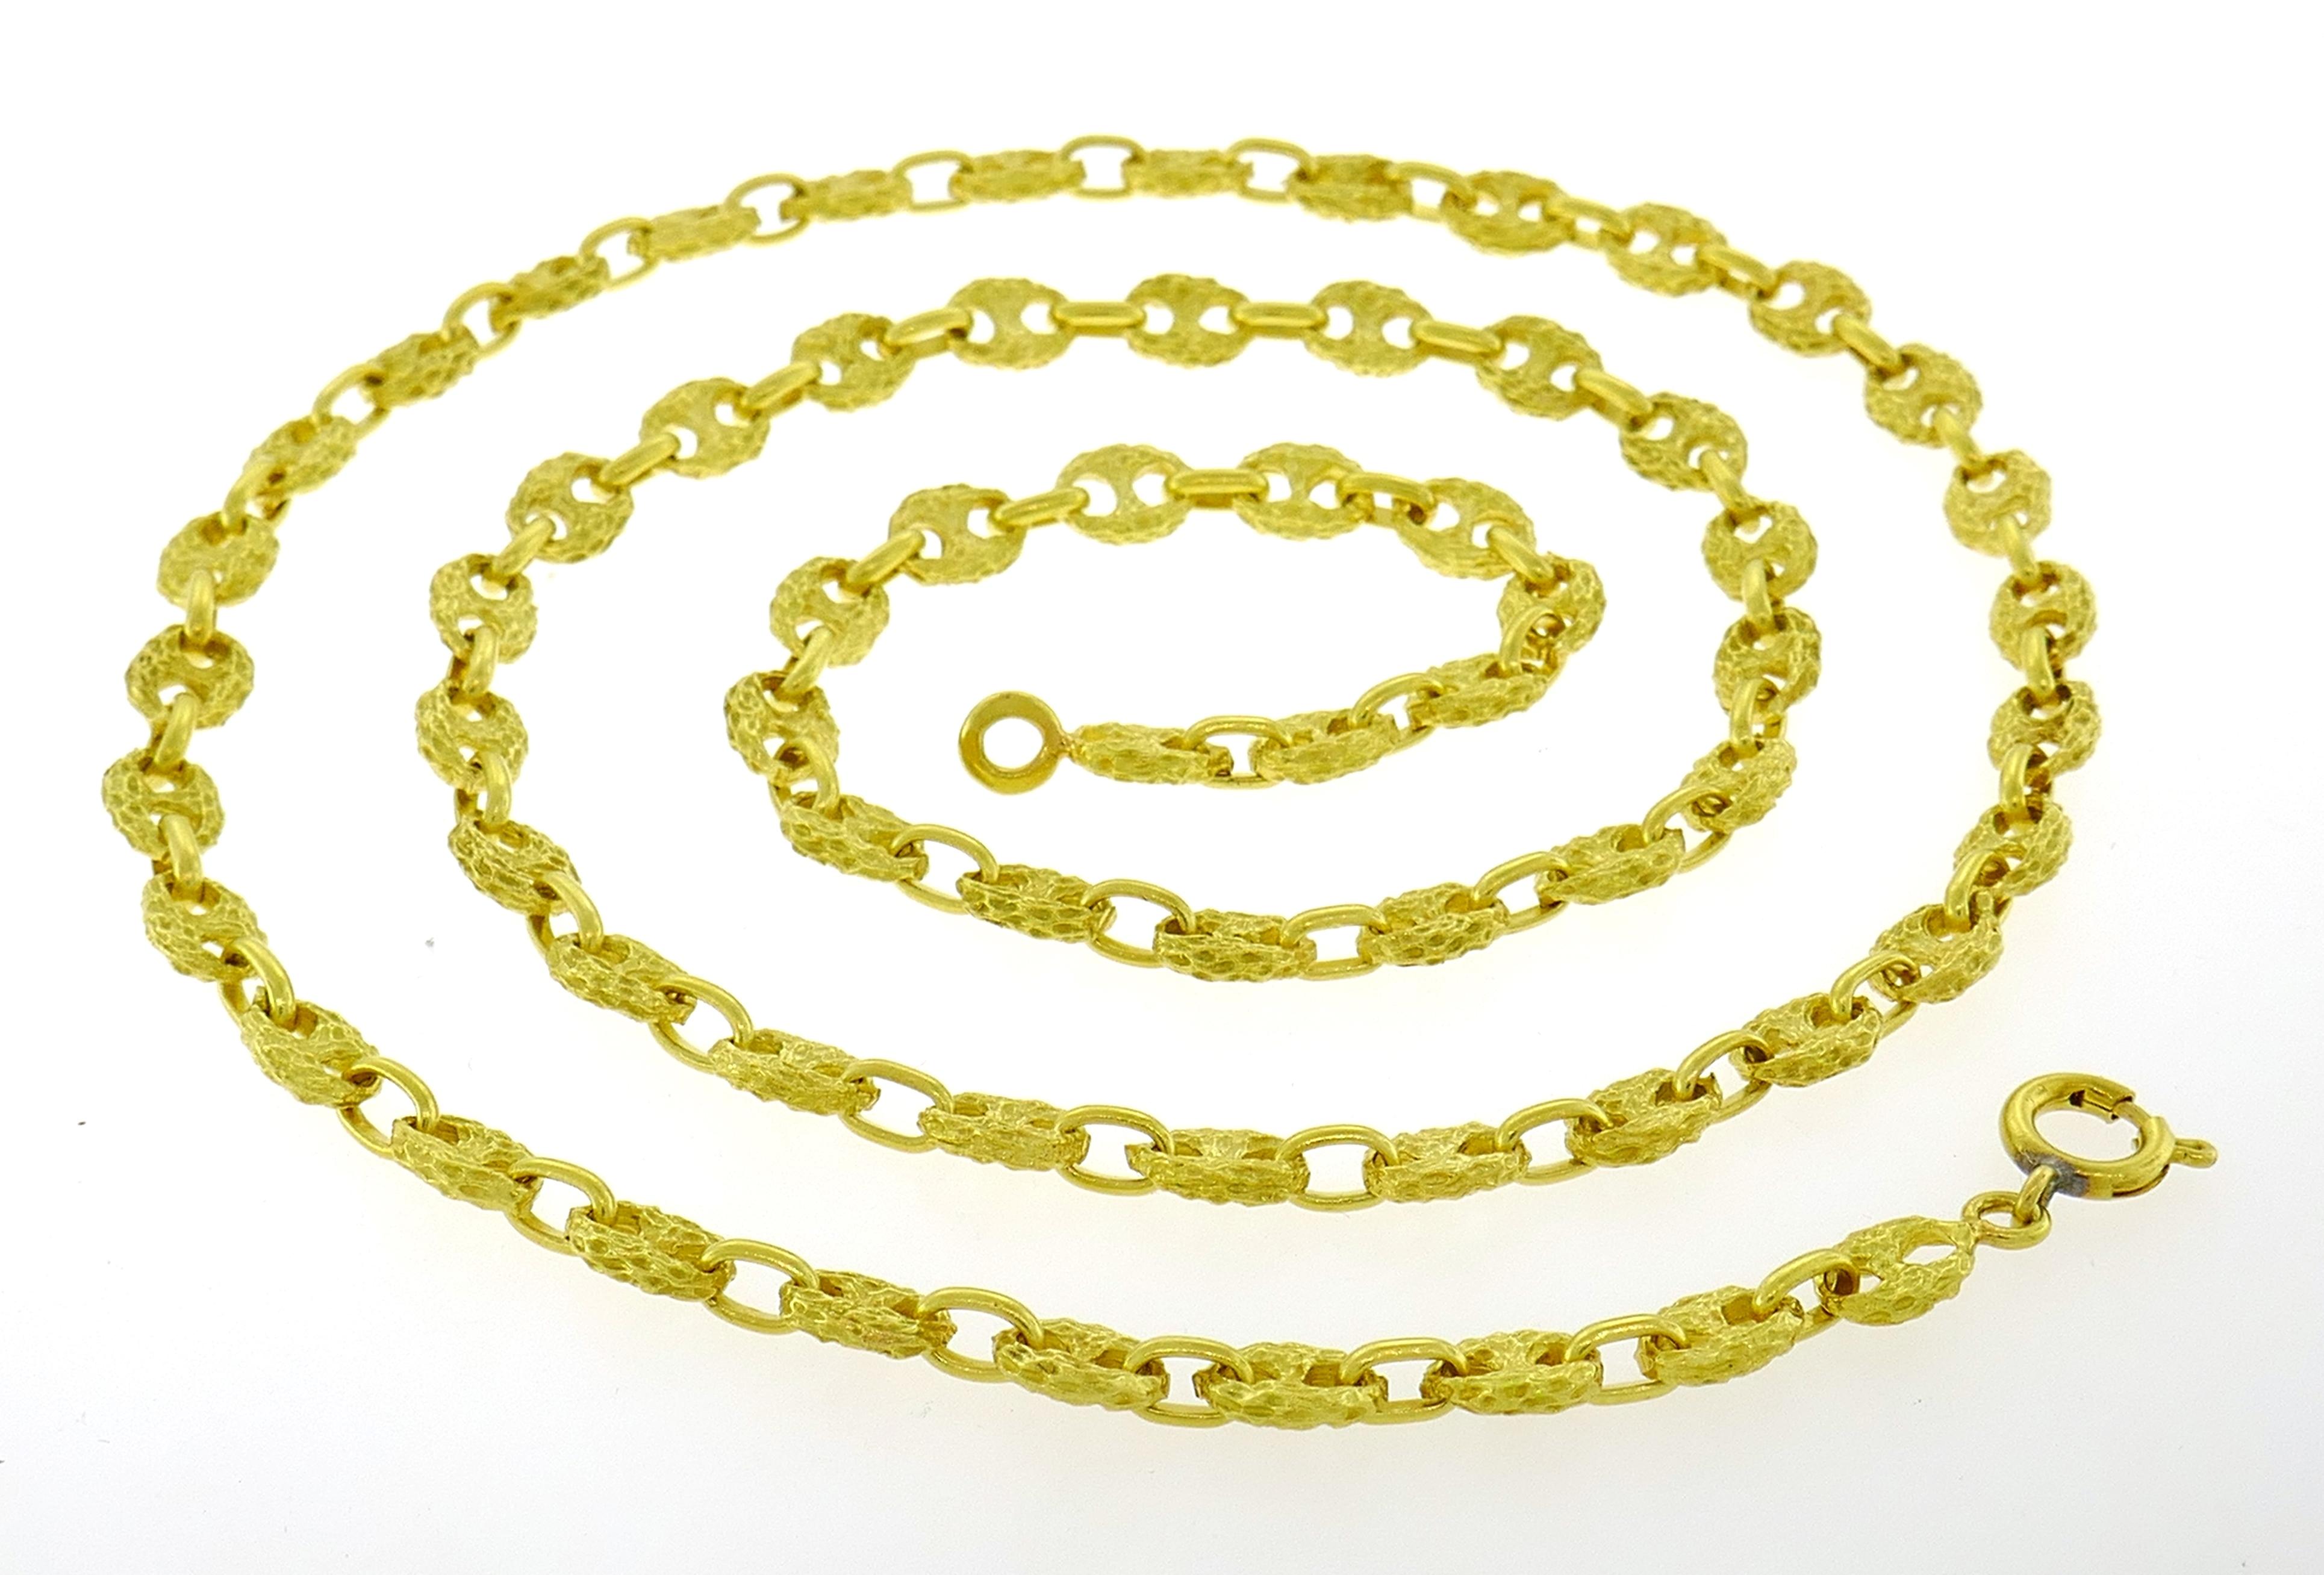 Women's or Men's Yellow Gold Nautical Chain Necklace, 1970s